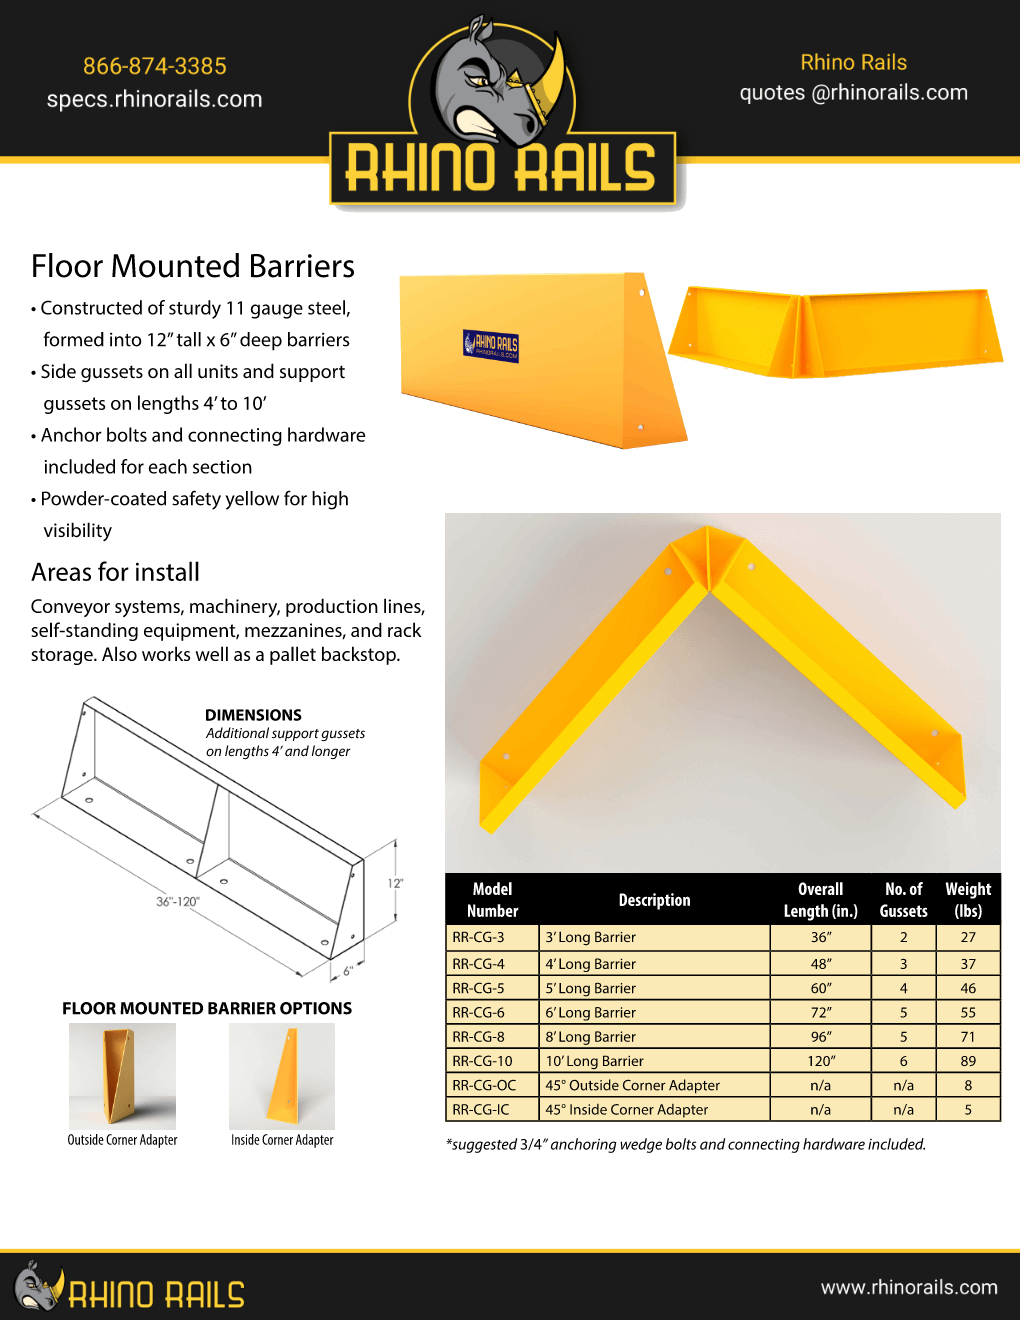 Floor Mounted Barrier - Product Information Sheet - Photo